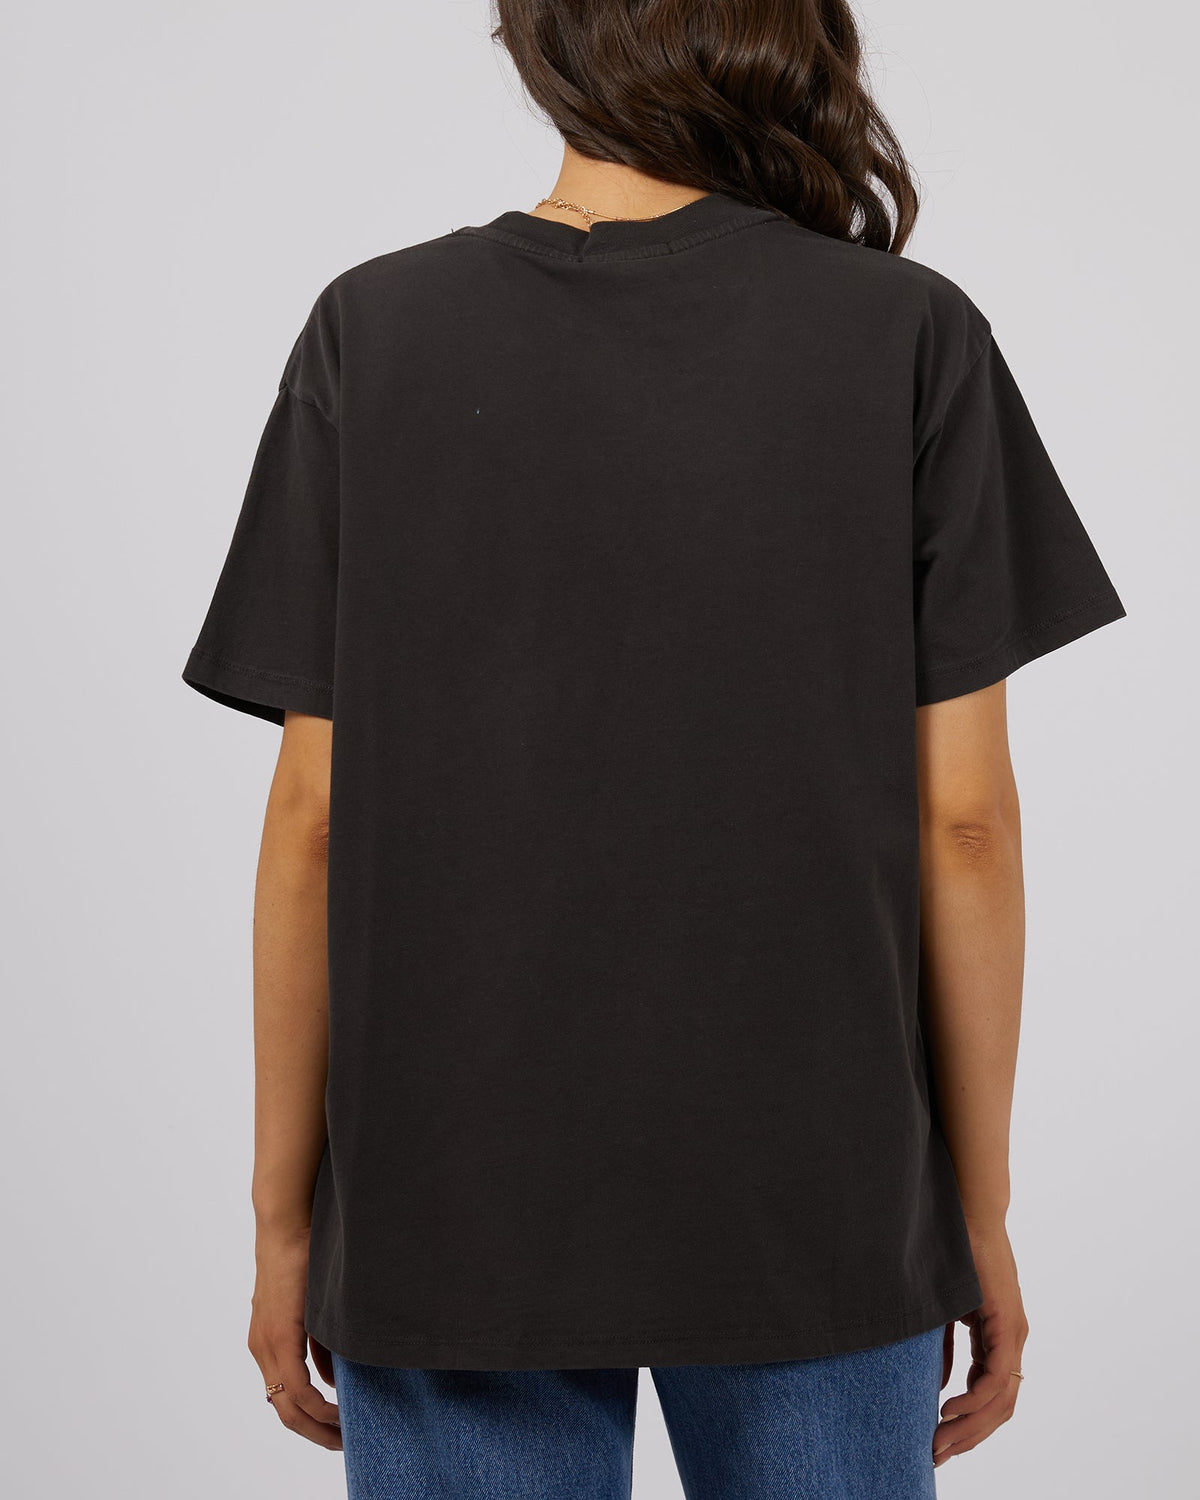 All About Eve-Belle Oversized Tee Washed Black-Edge Clothing